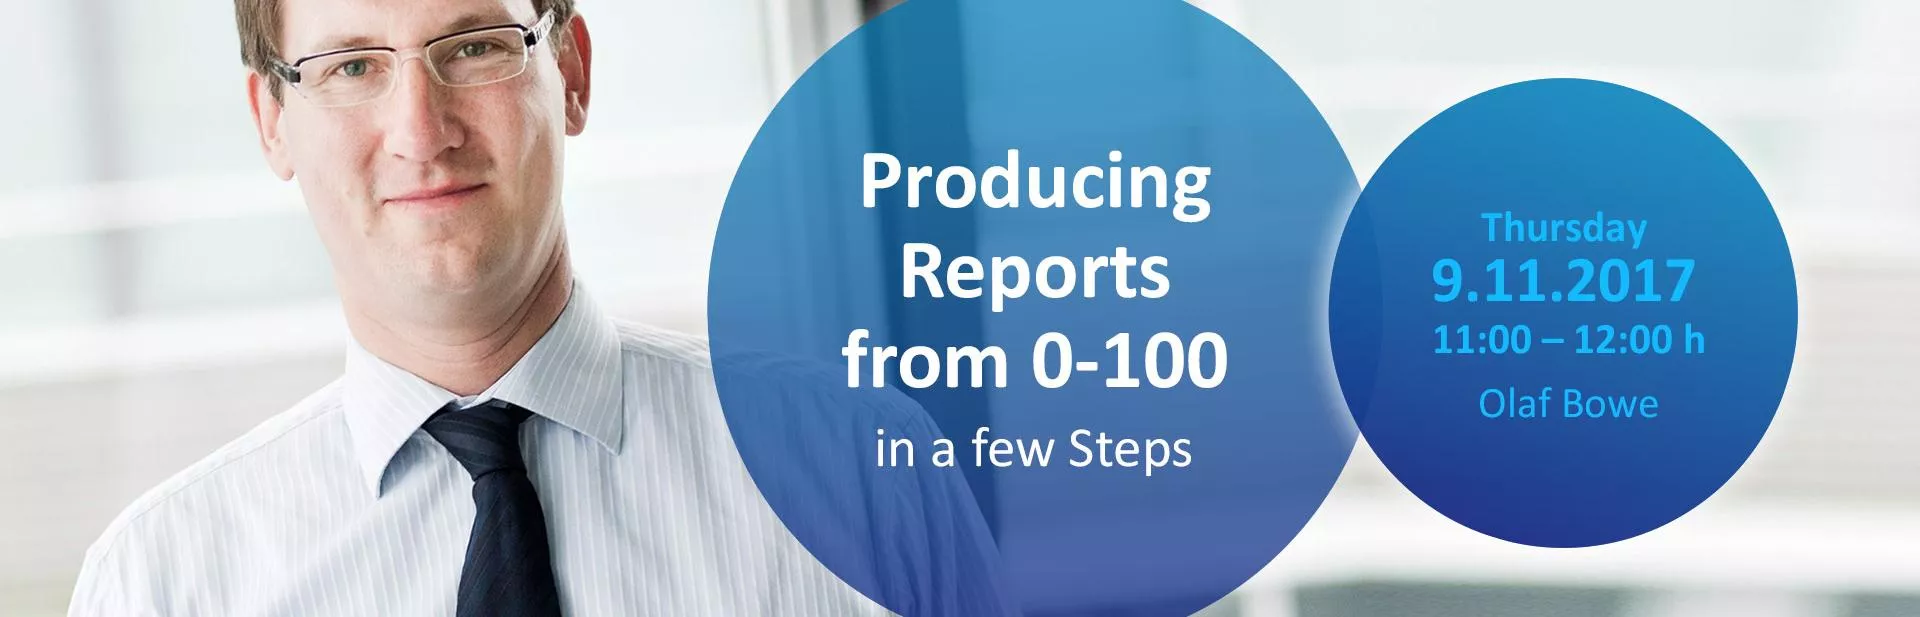 Webinar Producing Reports from 0-100